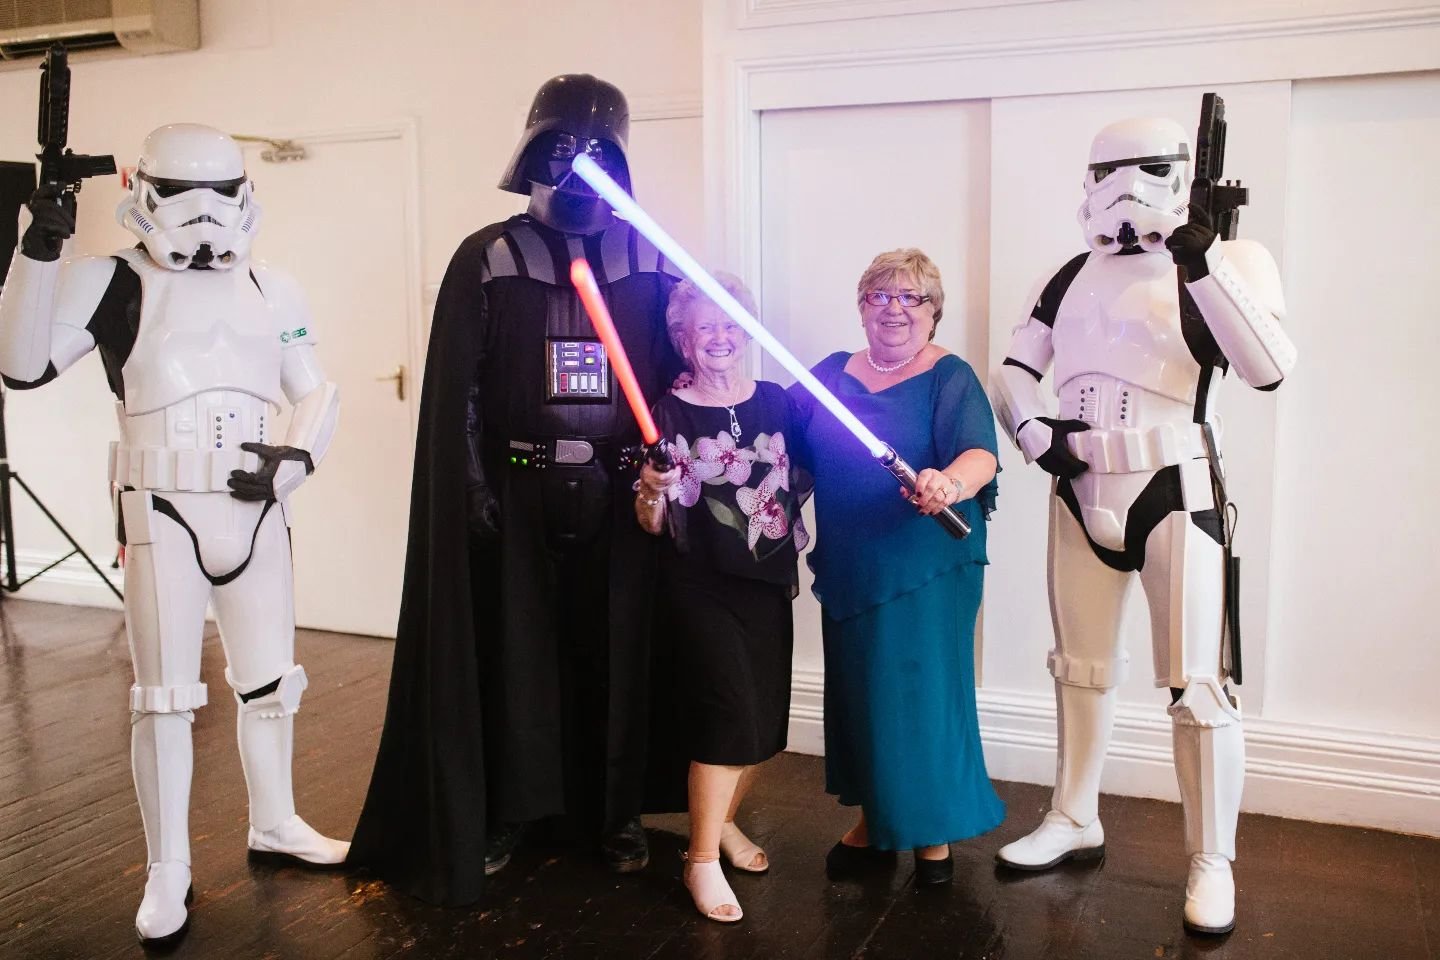 #maythe4thbewithyou all! Here's both of my grandmothers wielding lightsabers at mine &amp; @elishaclarkephotography's wedding in 2017. My nanny Brennan (blue lightsaber!) is no longer here with us but it's cool to look back and see how much she threw